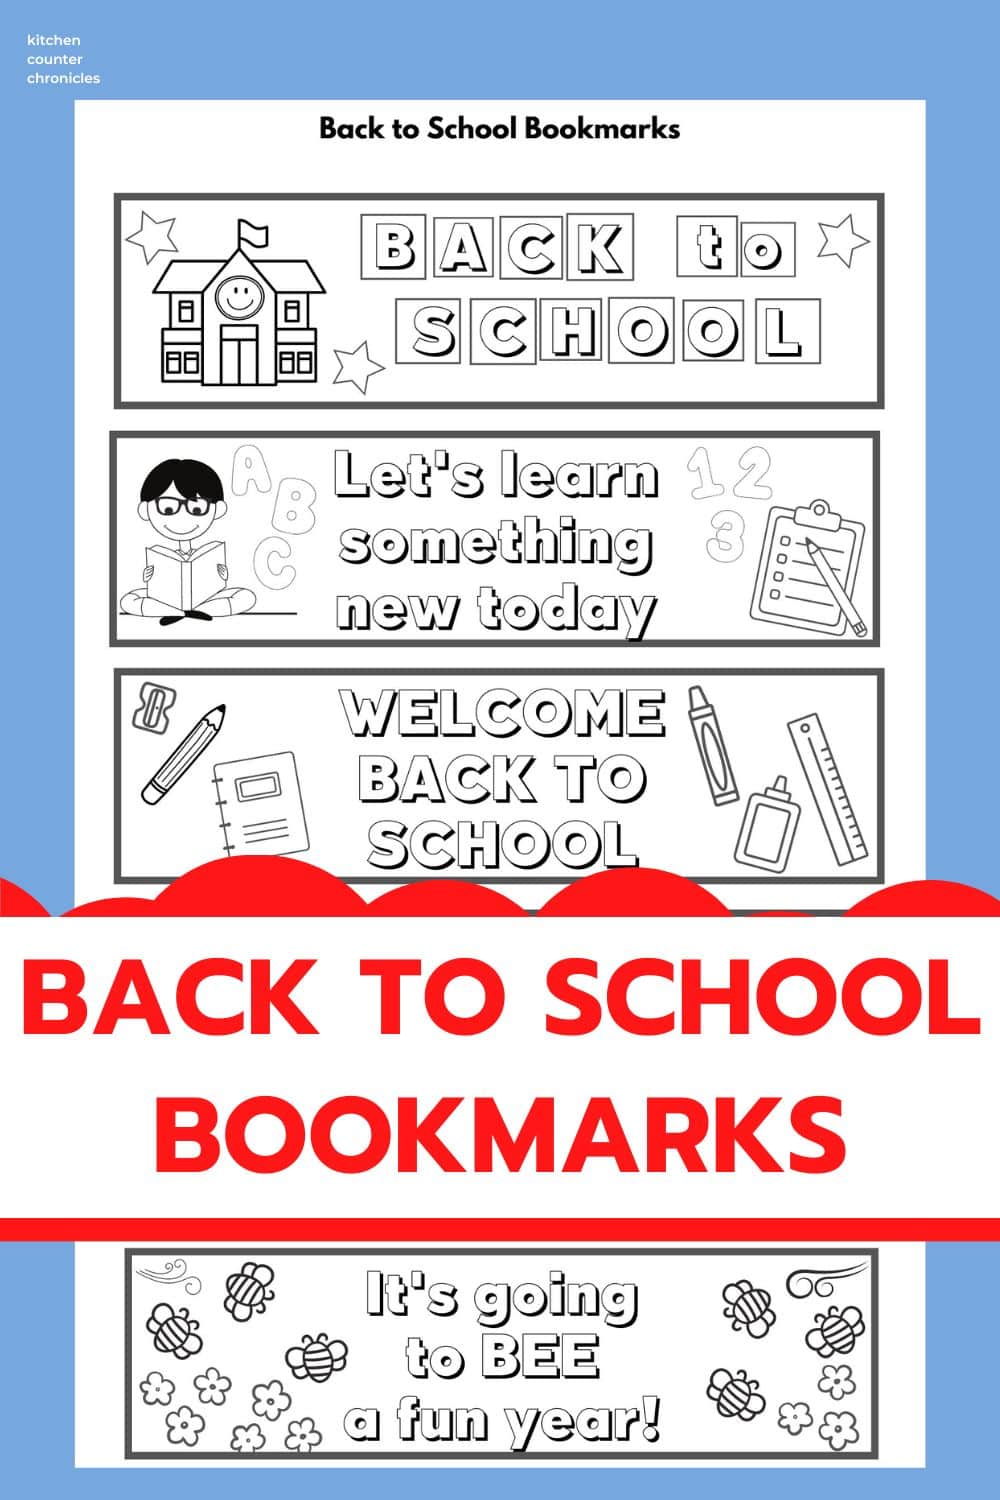 back to school bookmarks to color printed out with title